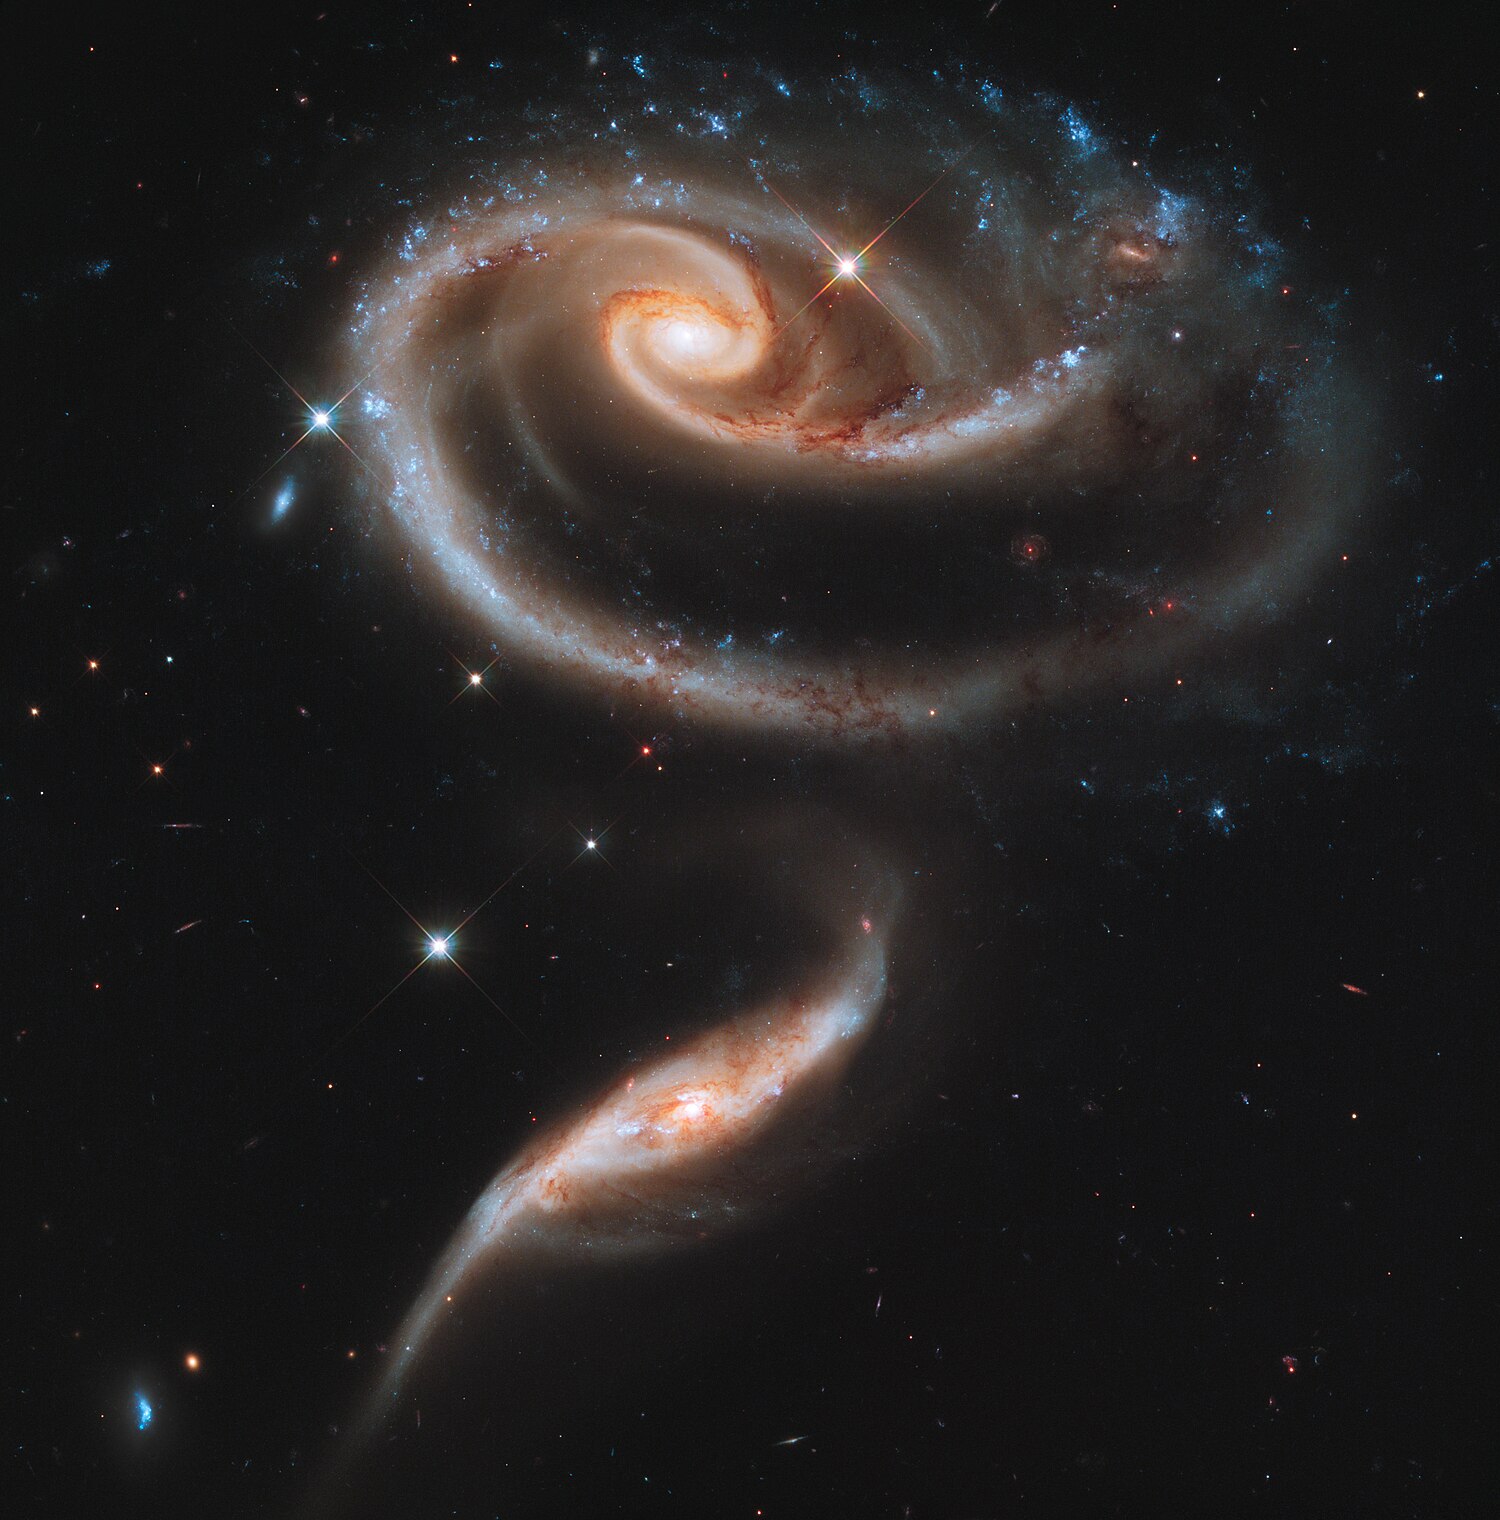 File:Principia Spiral Motion Due To Resistance.jpg - Wikimedia Commons